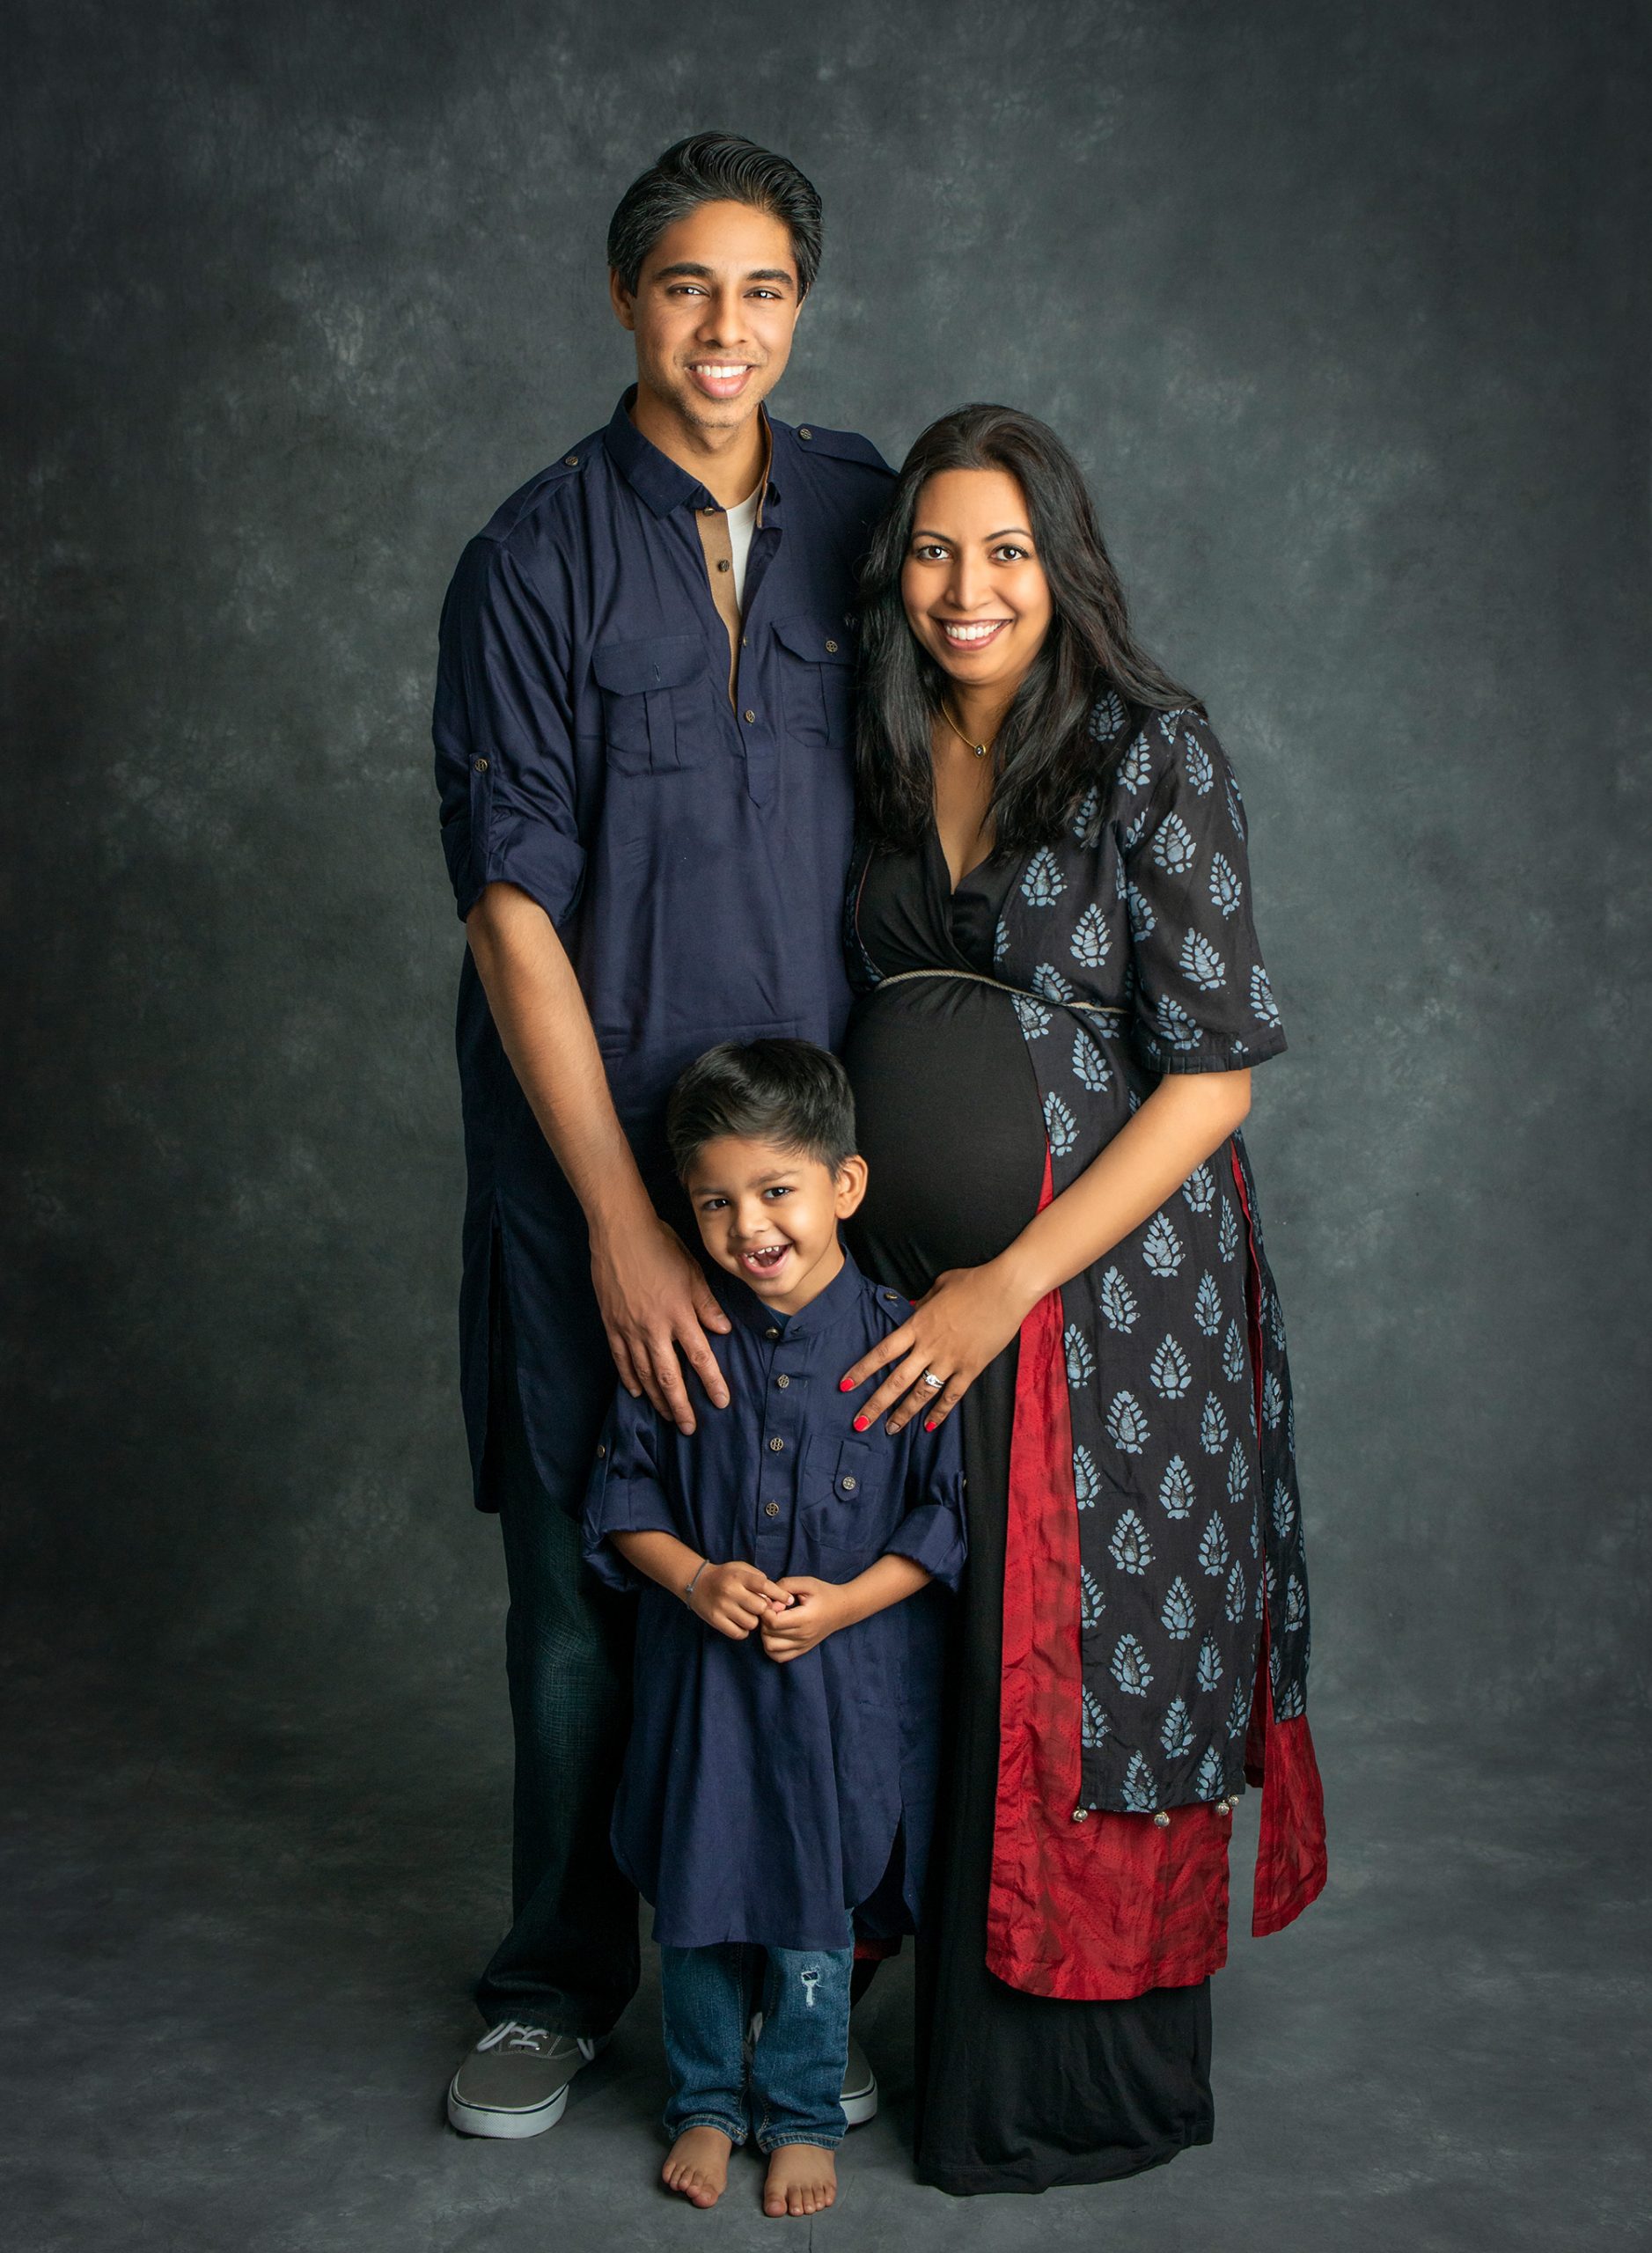 Family Maternity Photos pregnant woman posing with husband and smiling young son